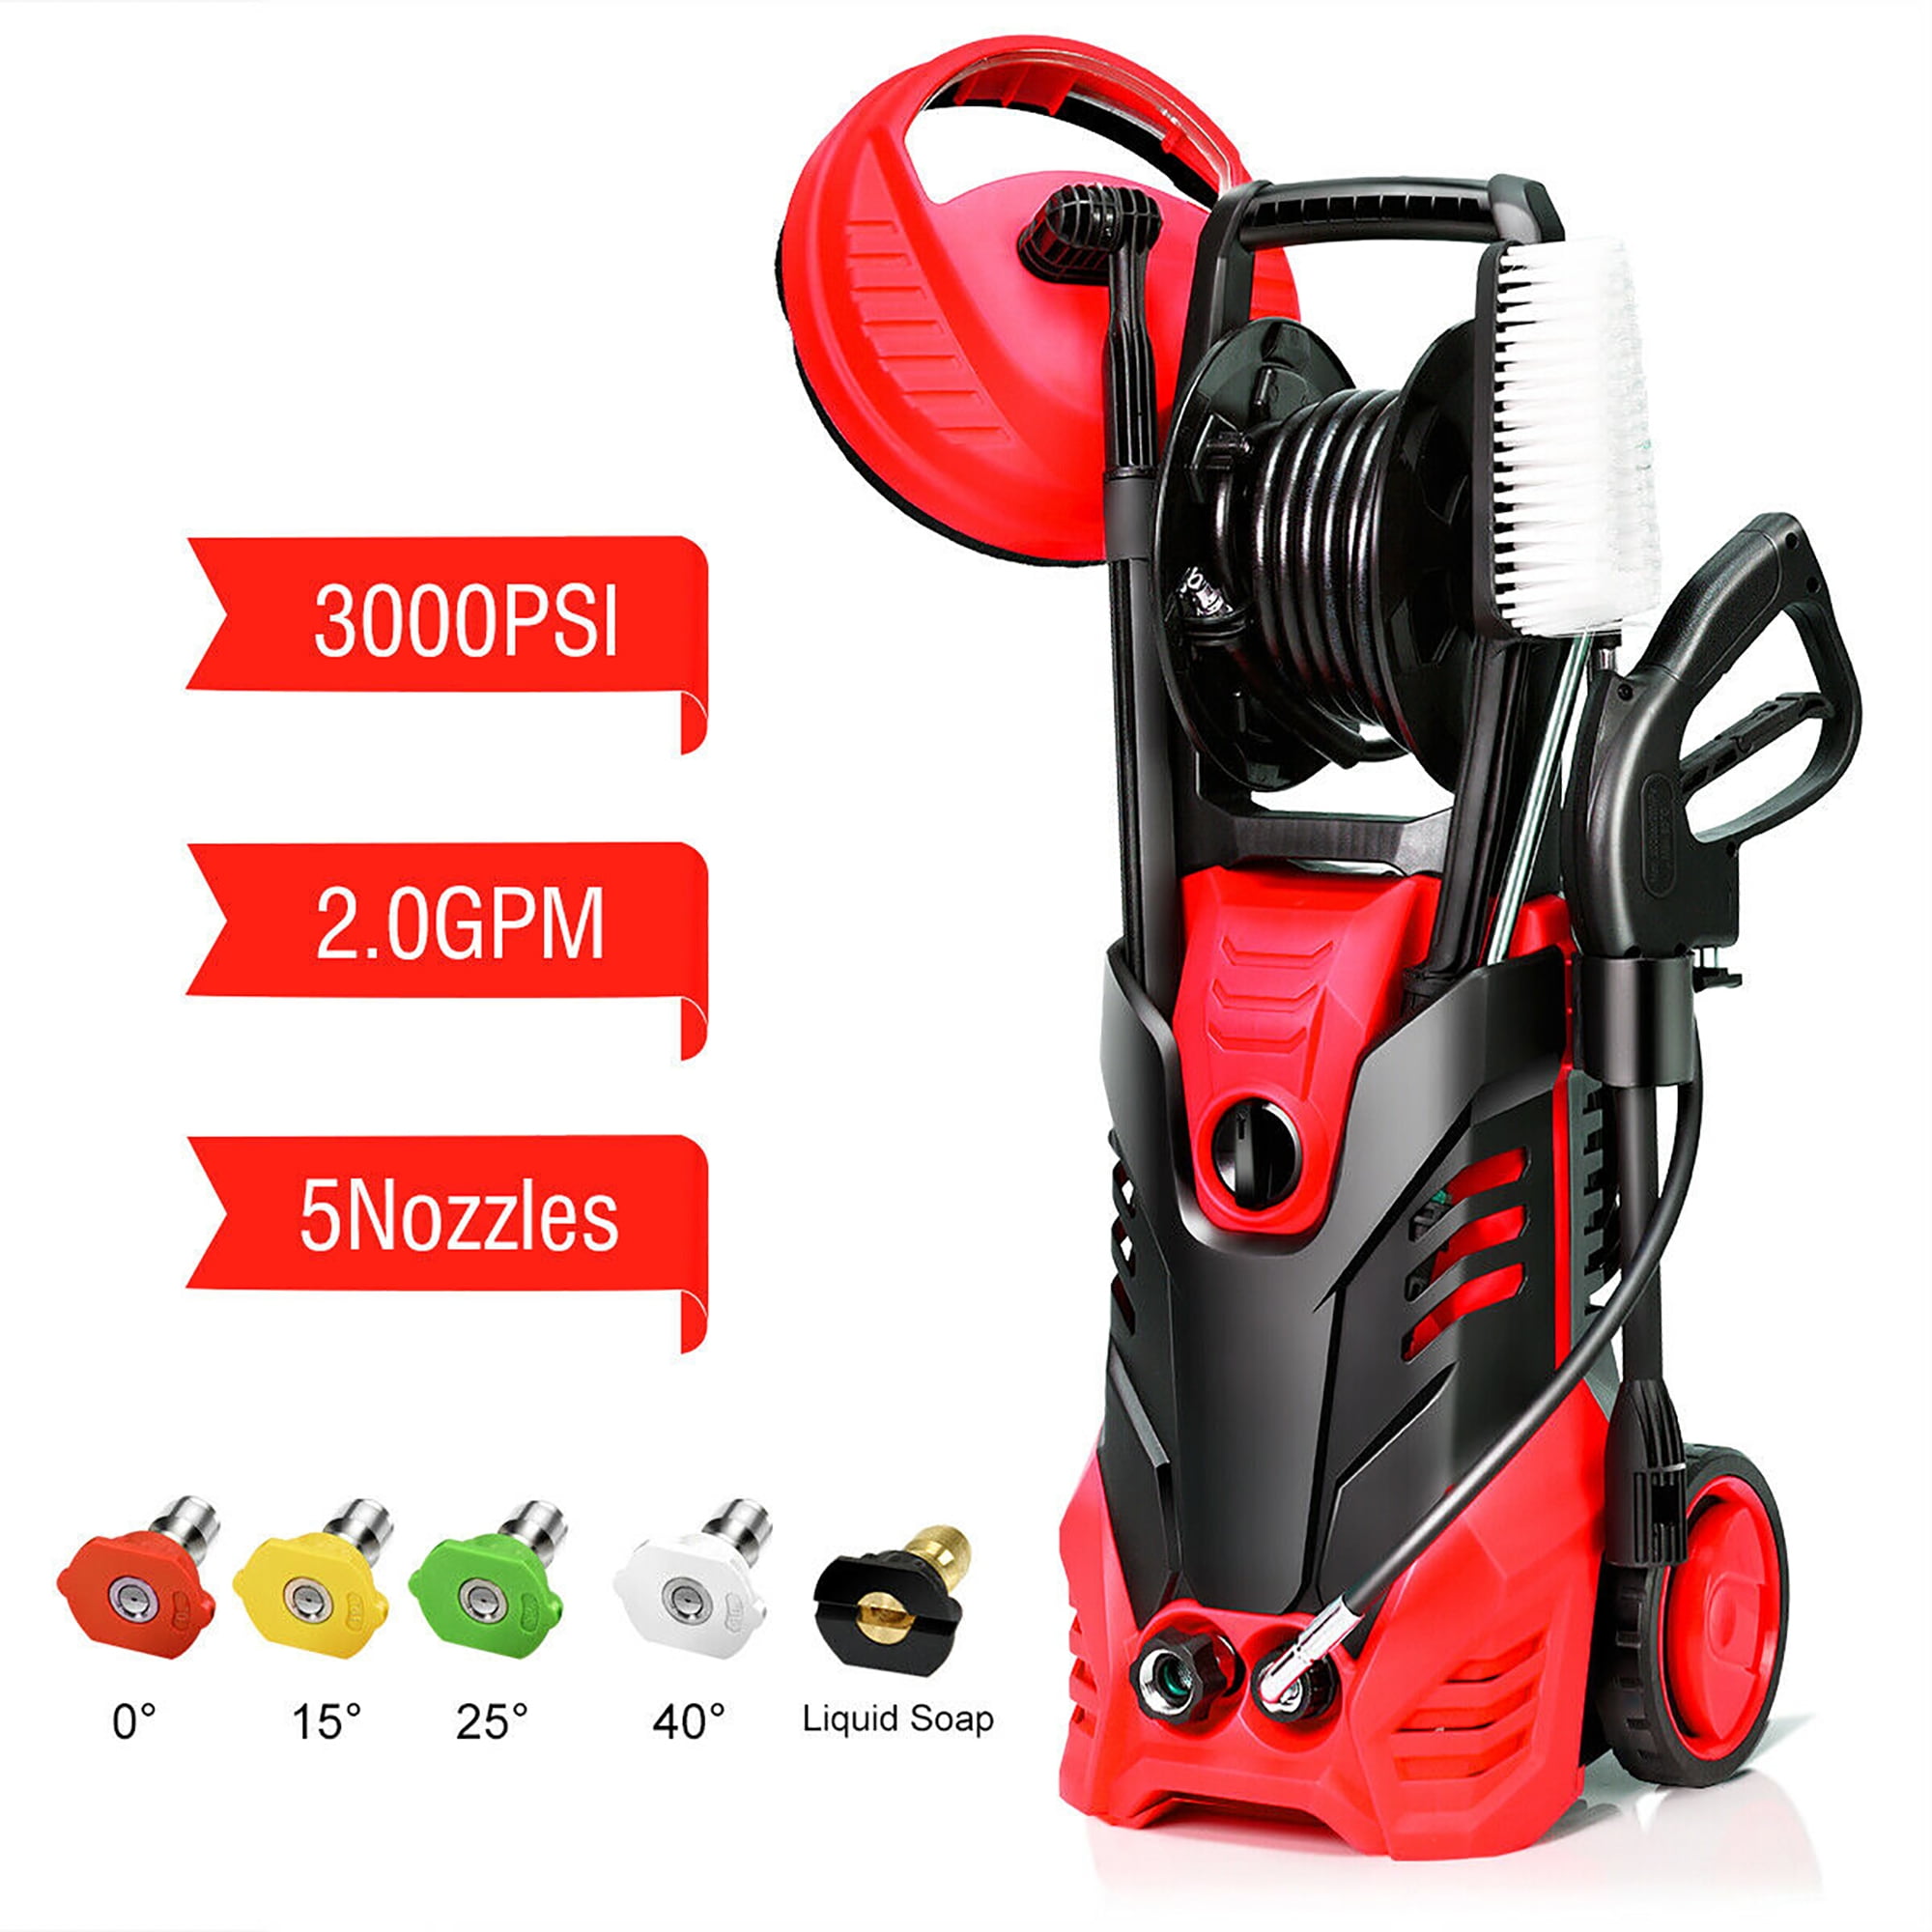 Giantex 3000PSI Electric Pressure Washer, Portable High Power Washer w/ 5  Nozzles, Hose Reel, Soap Bottle, 2 GPM 2000W (Red) 